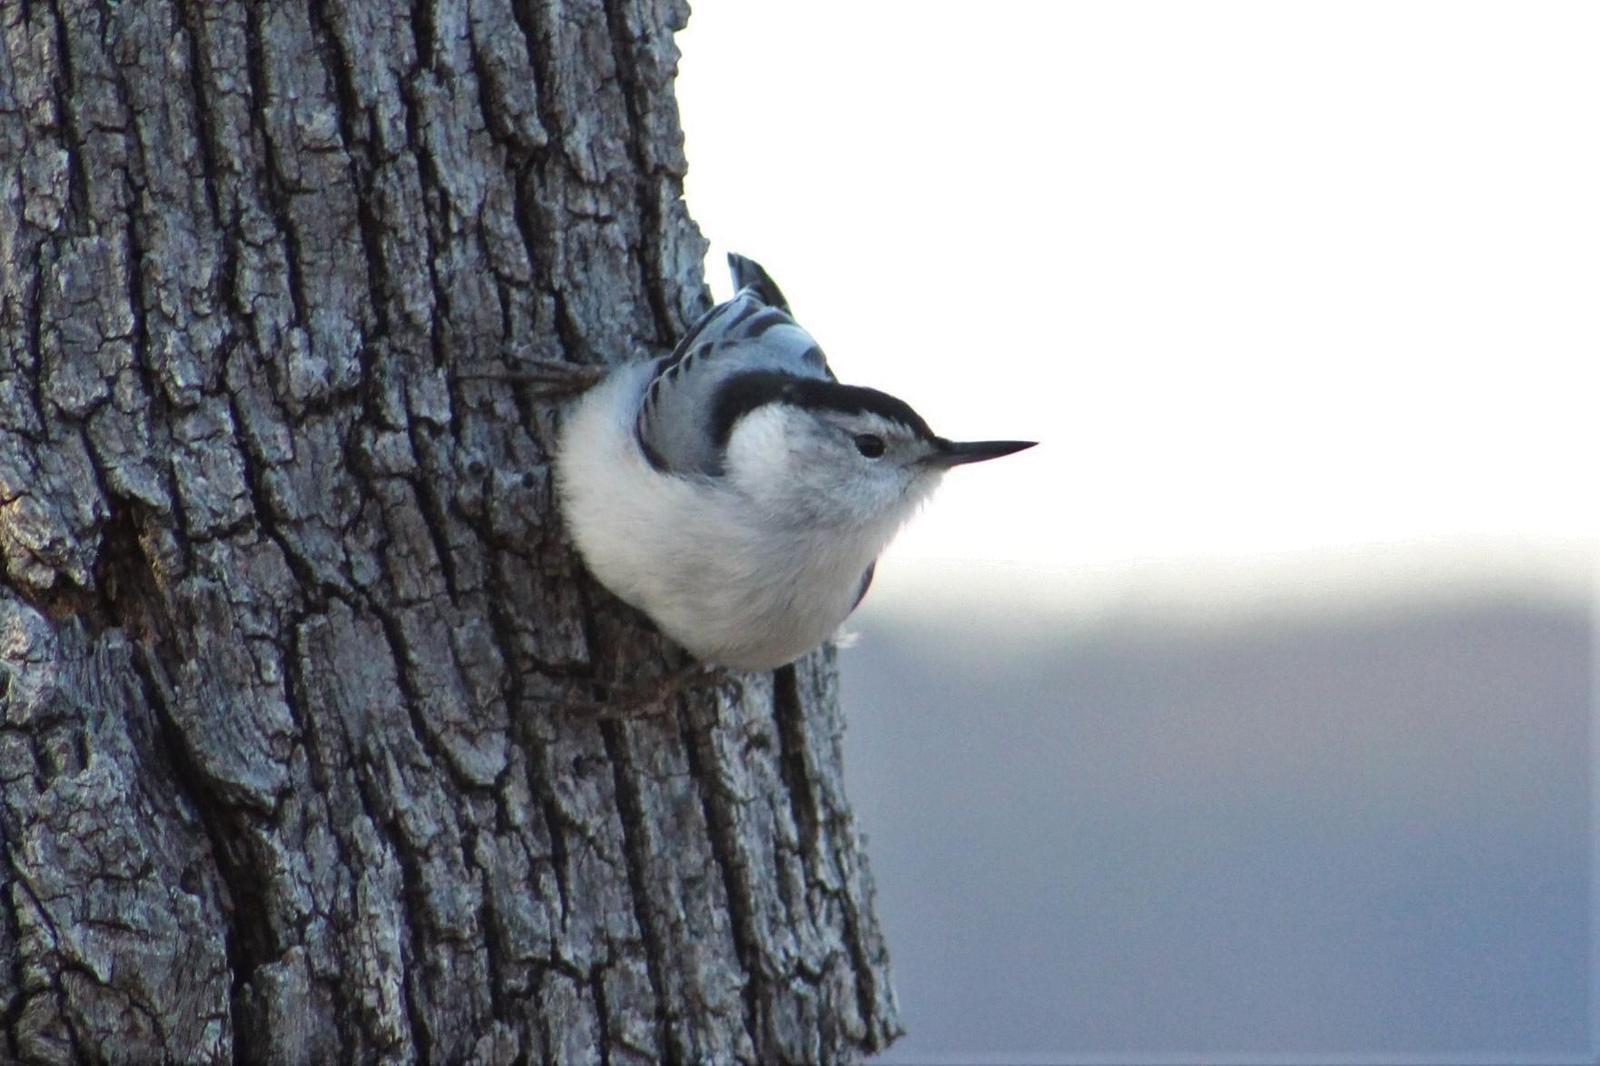 White-breasted Nuthatch Photo by Tony Heindel